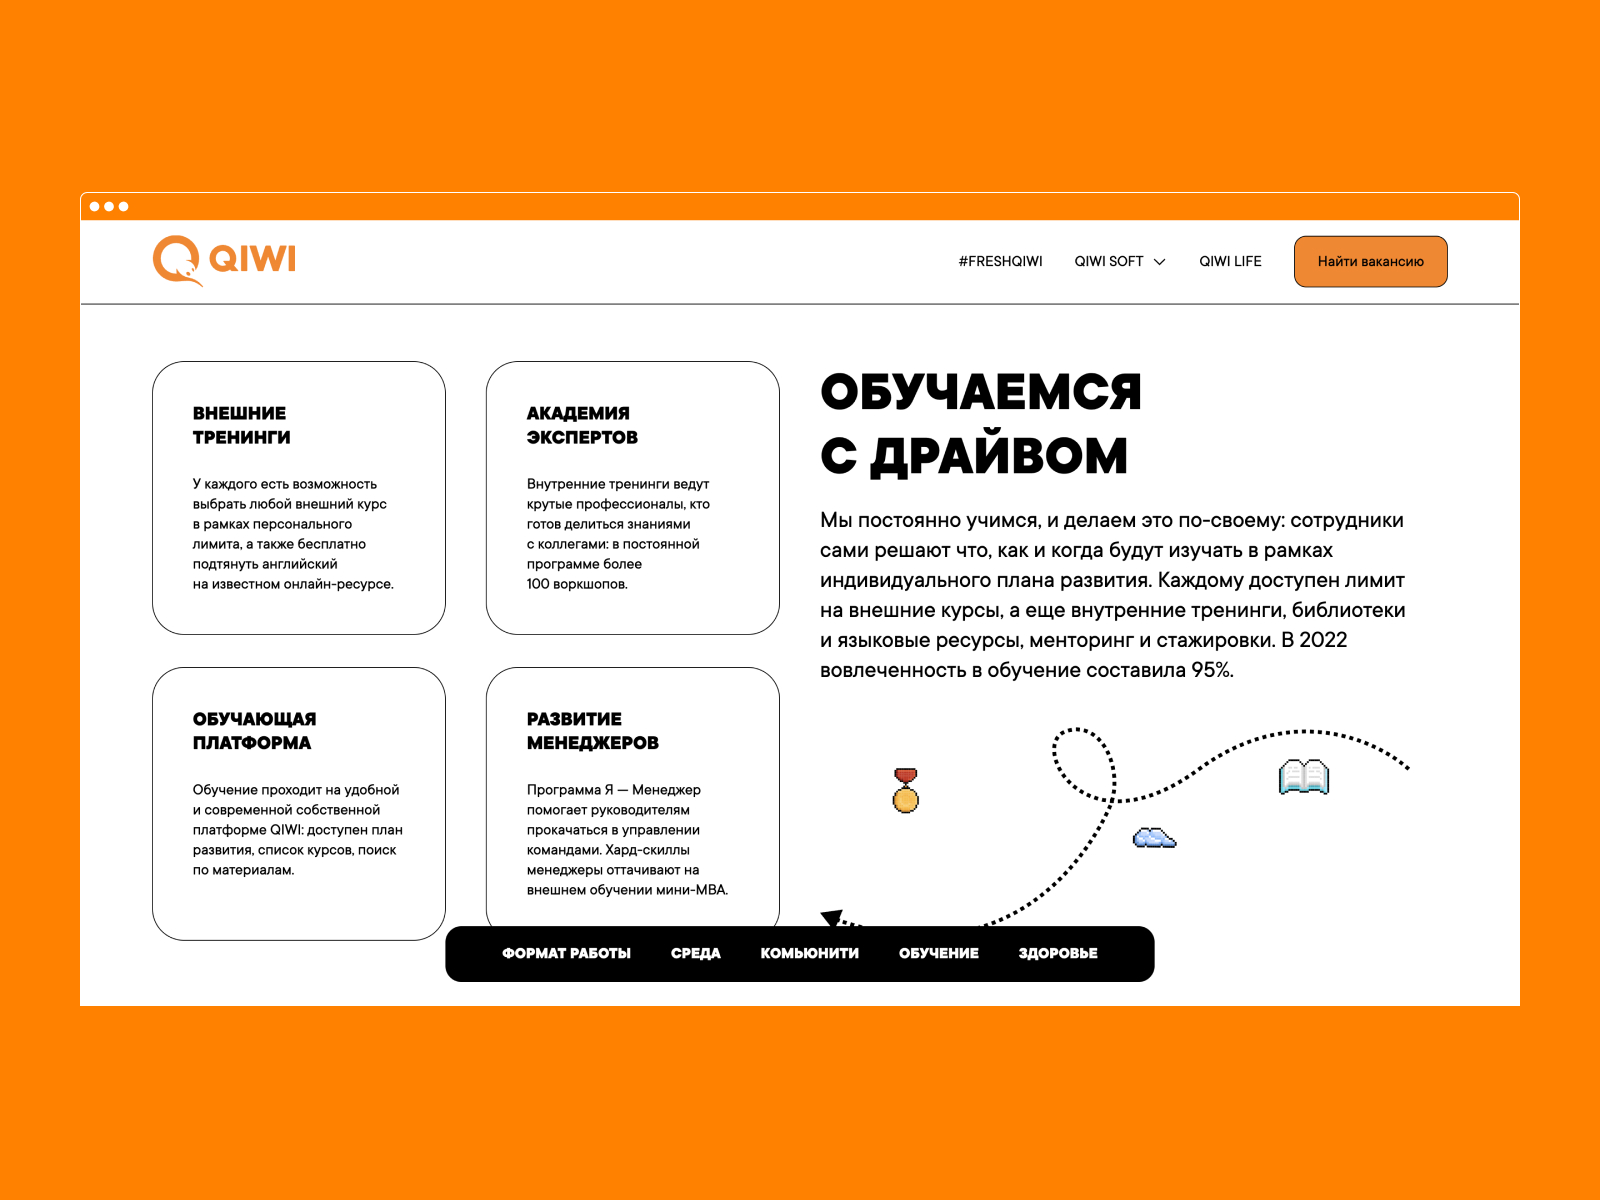 LIFE IN QIWI Plan your day, choose the format of work and dress as you like.